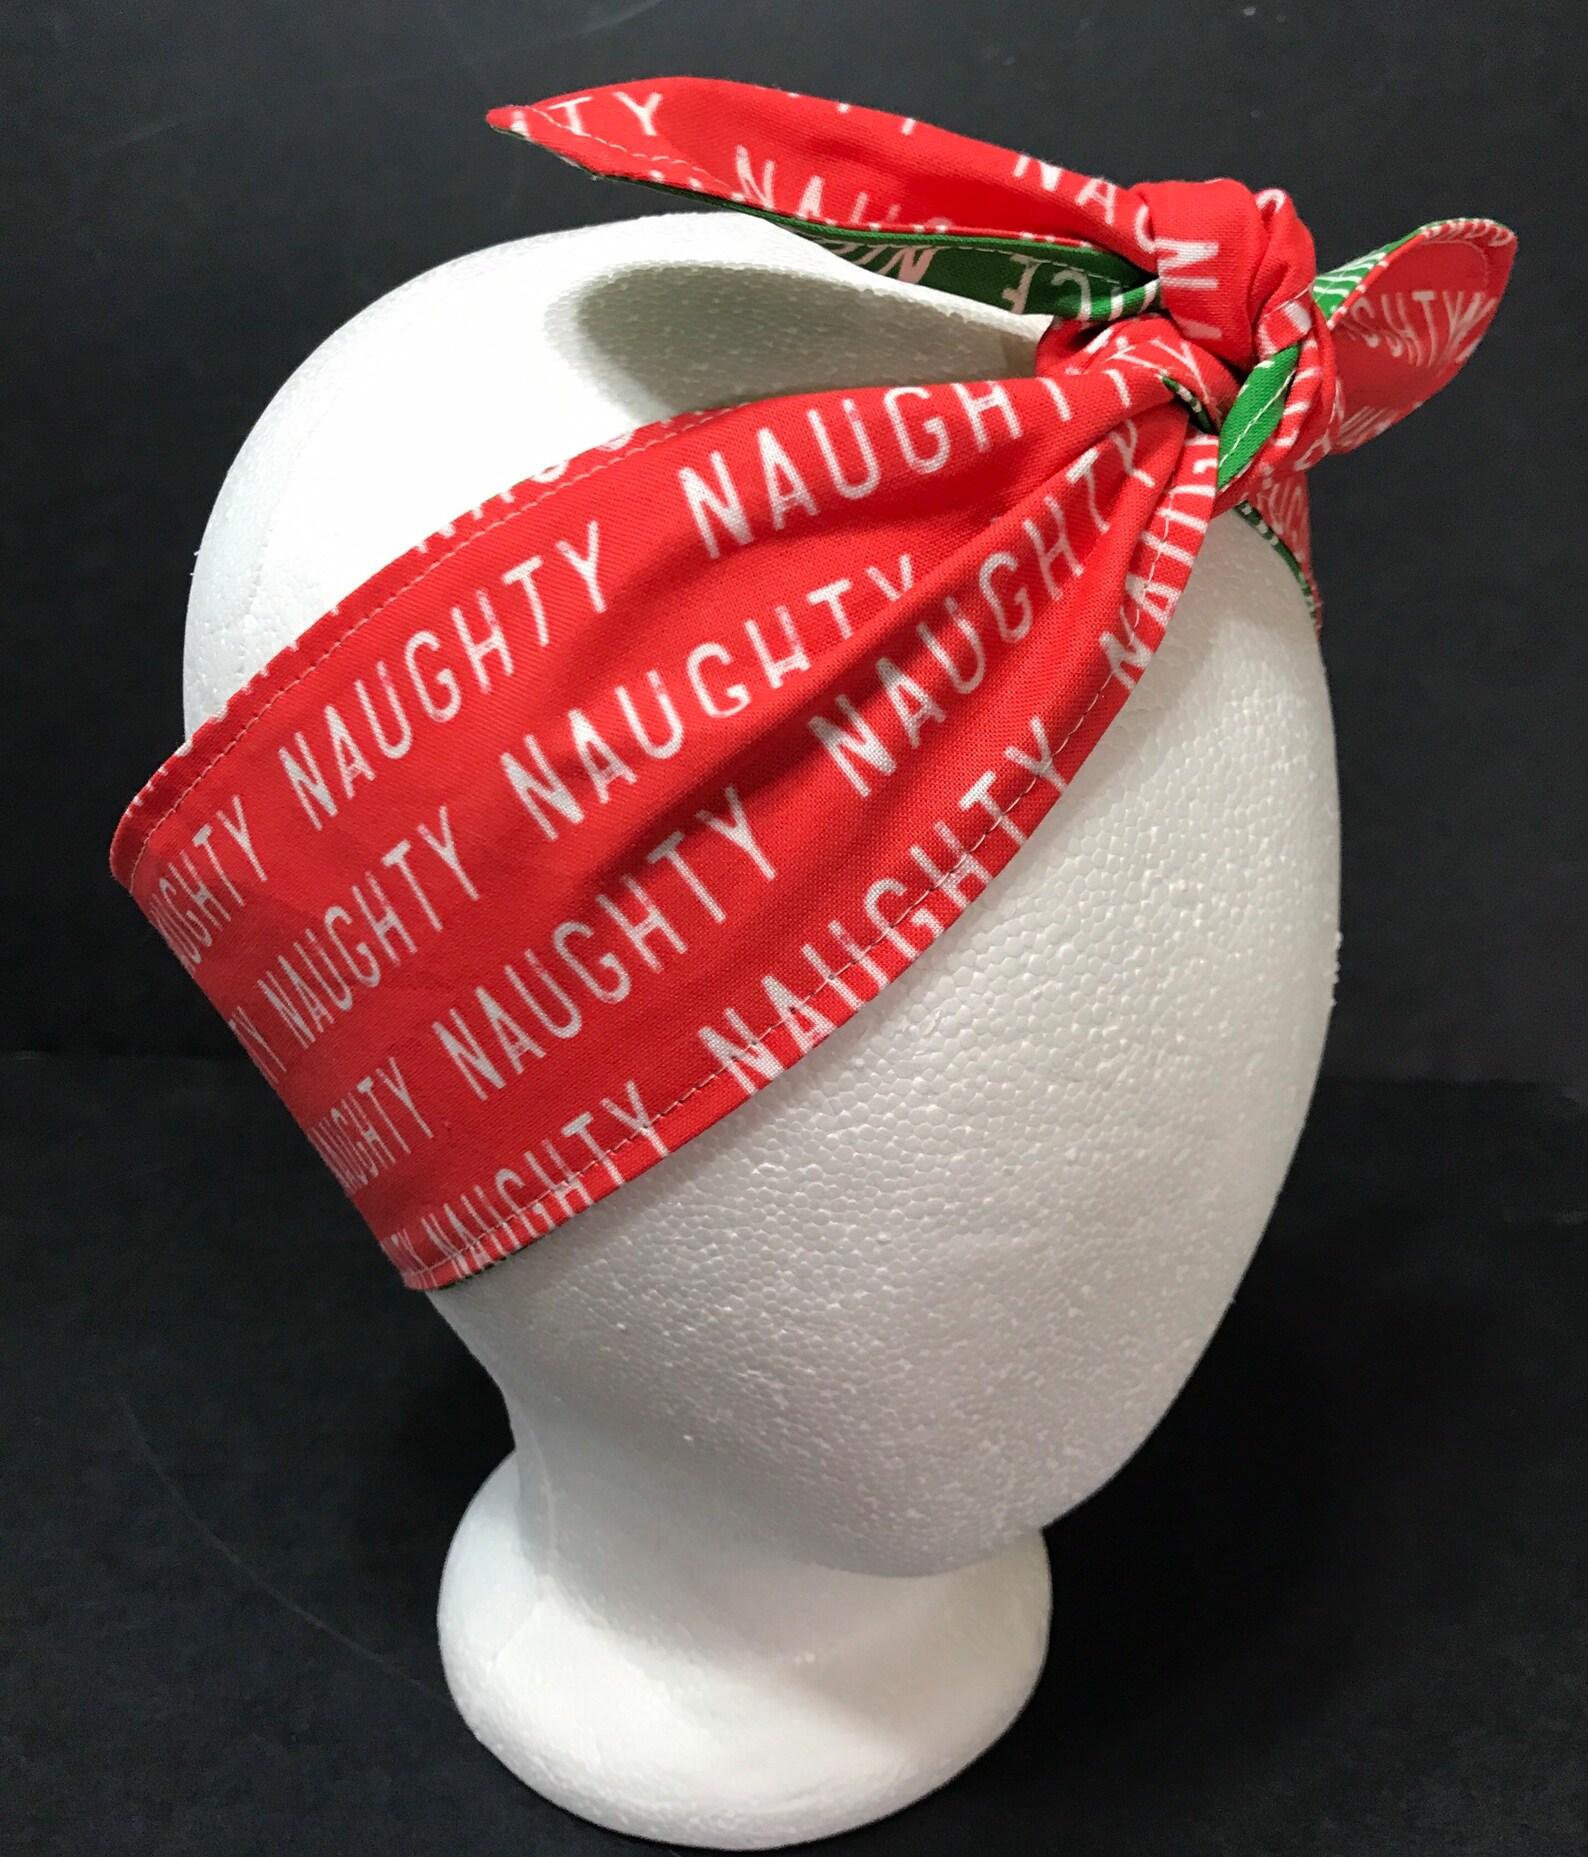 Christmas theme headband showing it tied on top on mannequin, red "Naughty" side showing